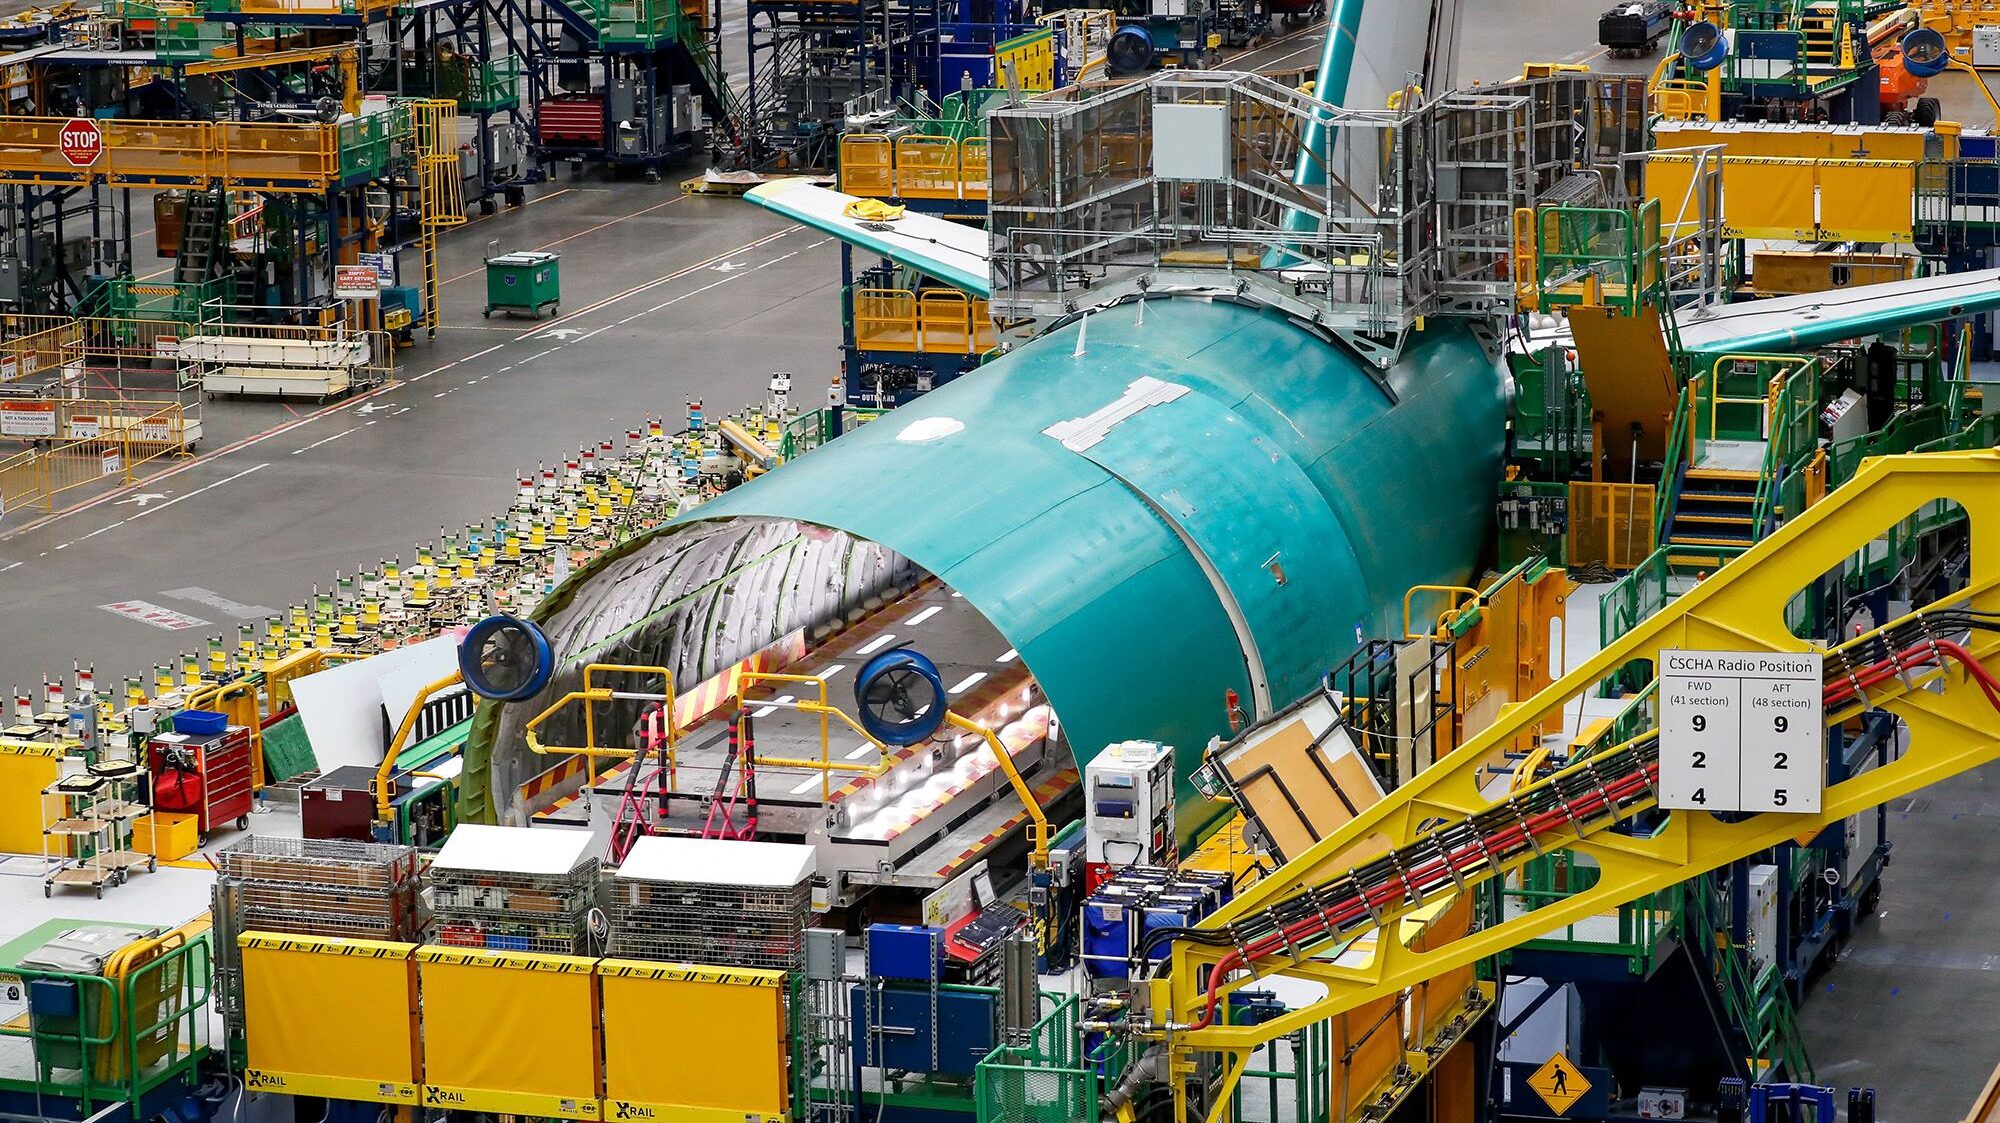 The rear fuselage section of a 777, boeing whistleblower alleges manufacturing issues...